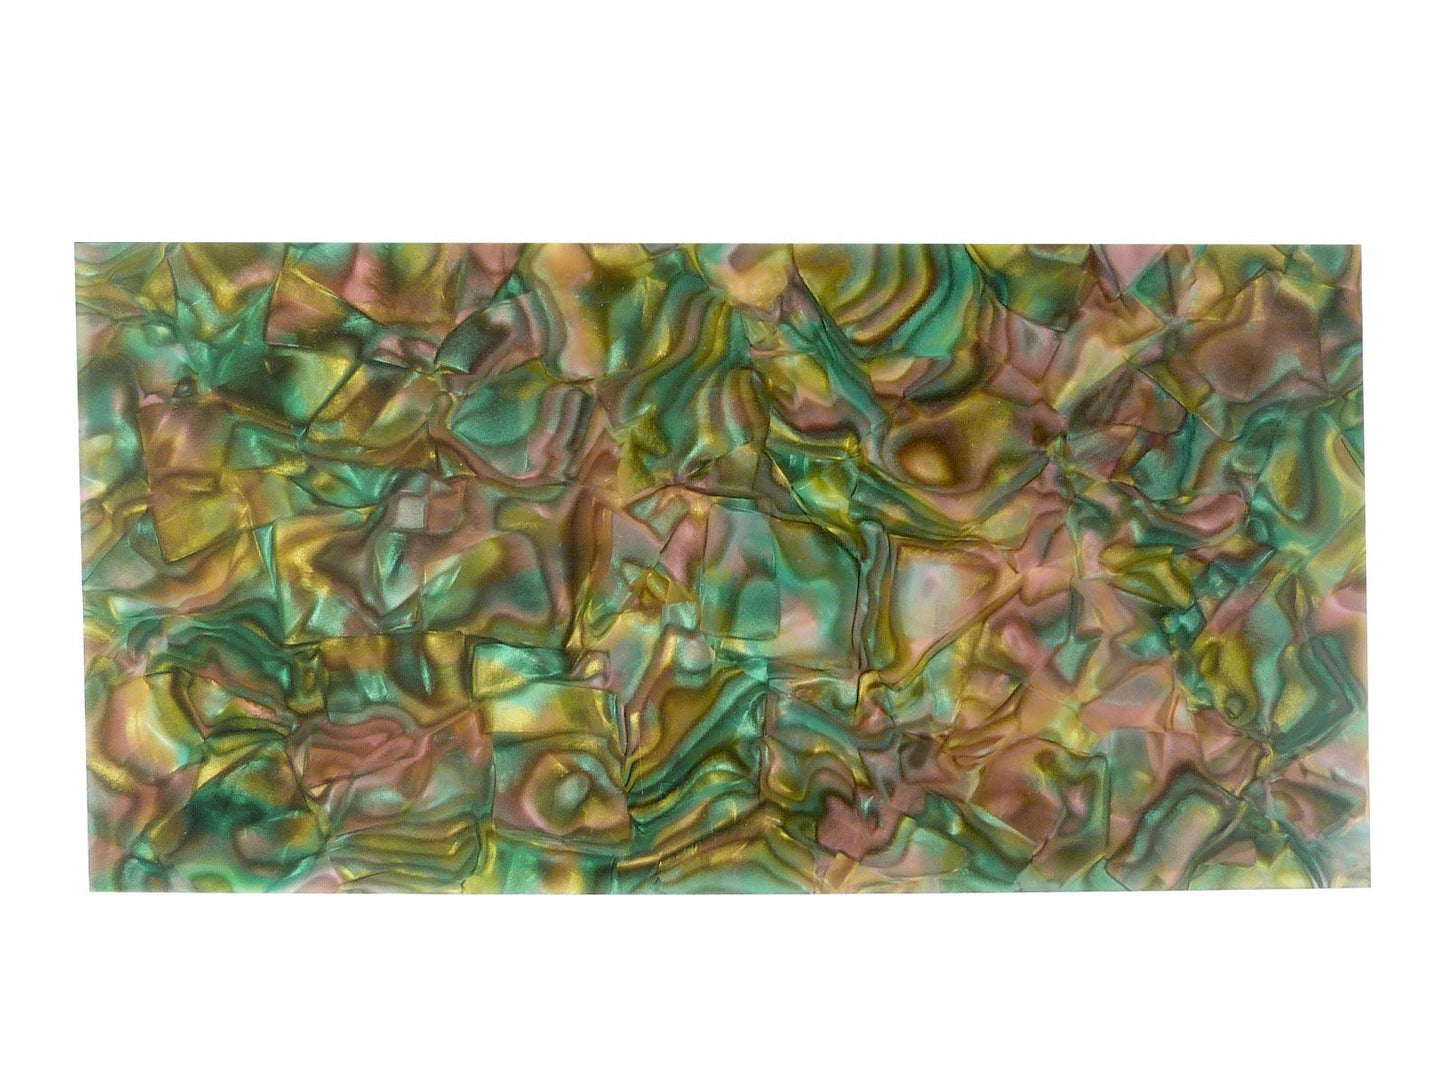 Incudo Pink Abalone Shell Celluloid Sheet - 200x100x1.5mm (7.9x3.94x0.06")